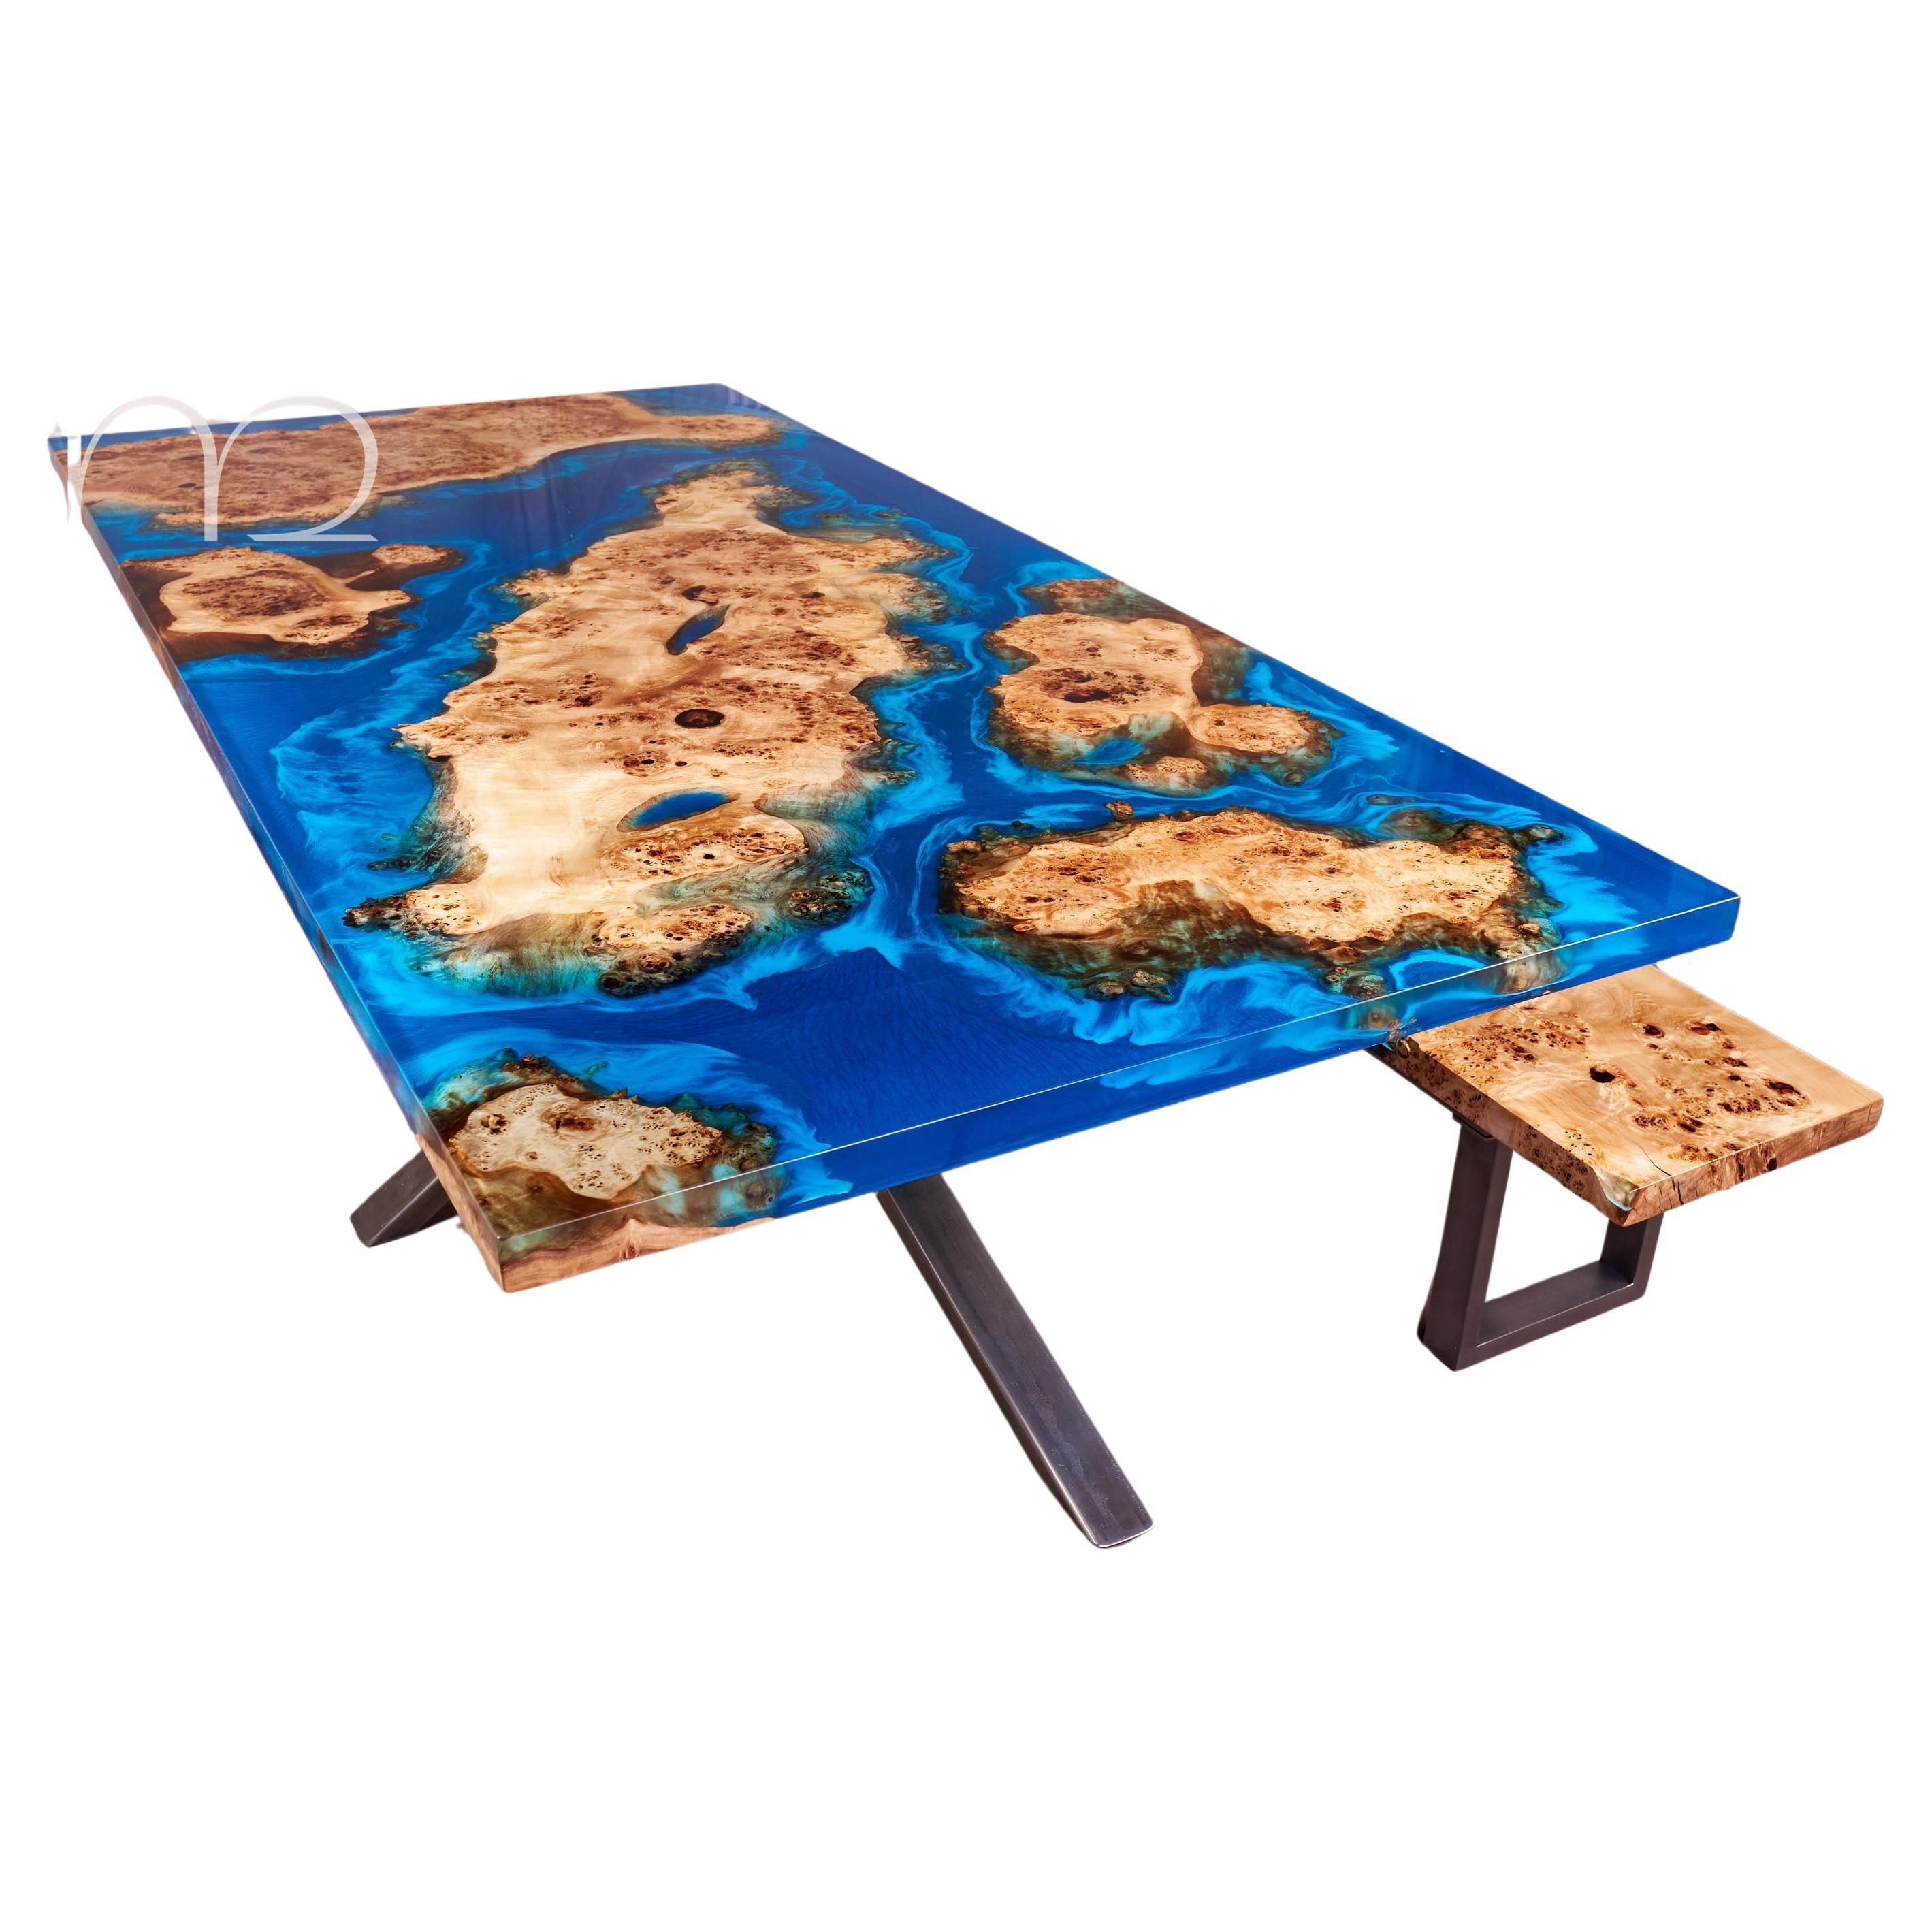 Burl Wood Dining Table Contemporary Modern Dining Table Handmade Wooden Tables For Sale